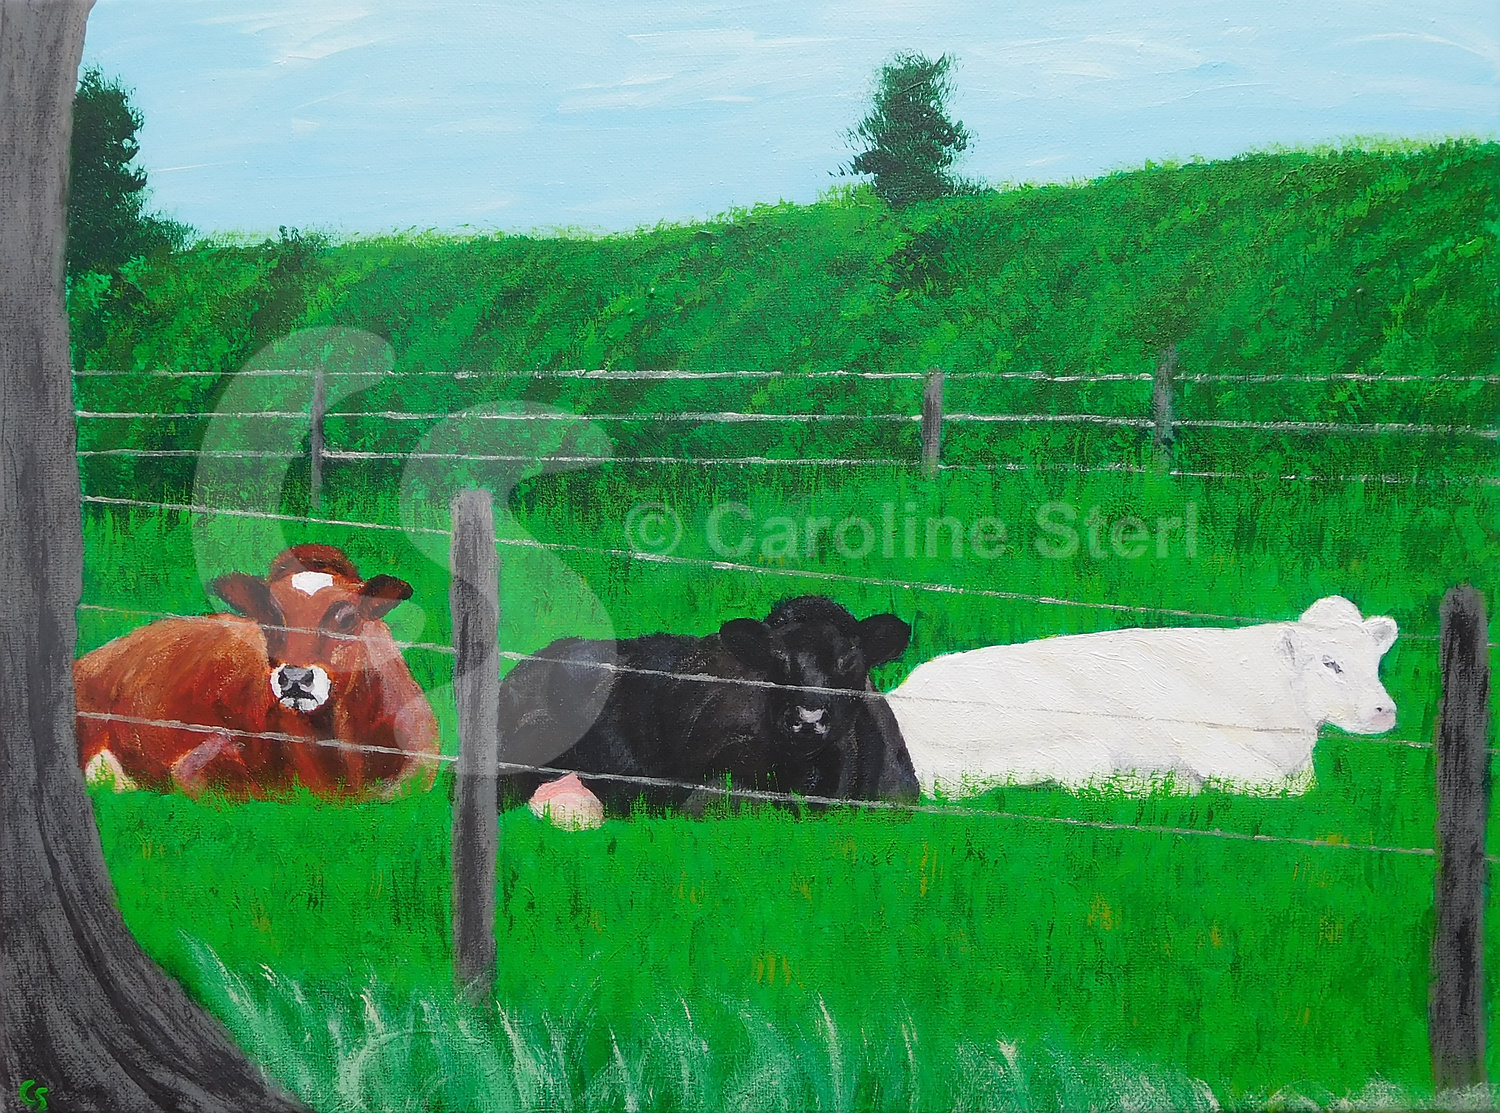 Painting: Cows